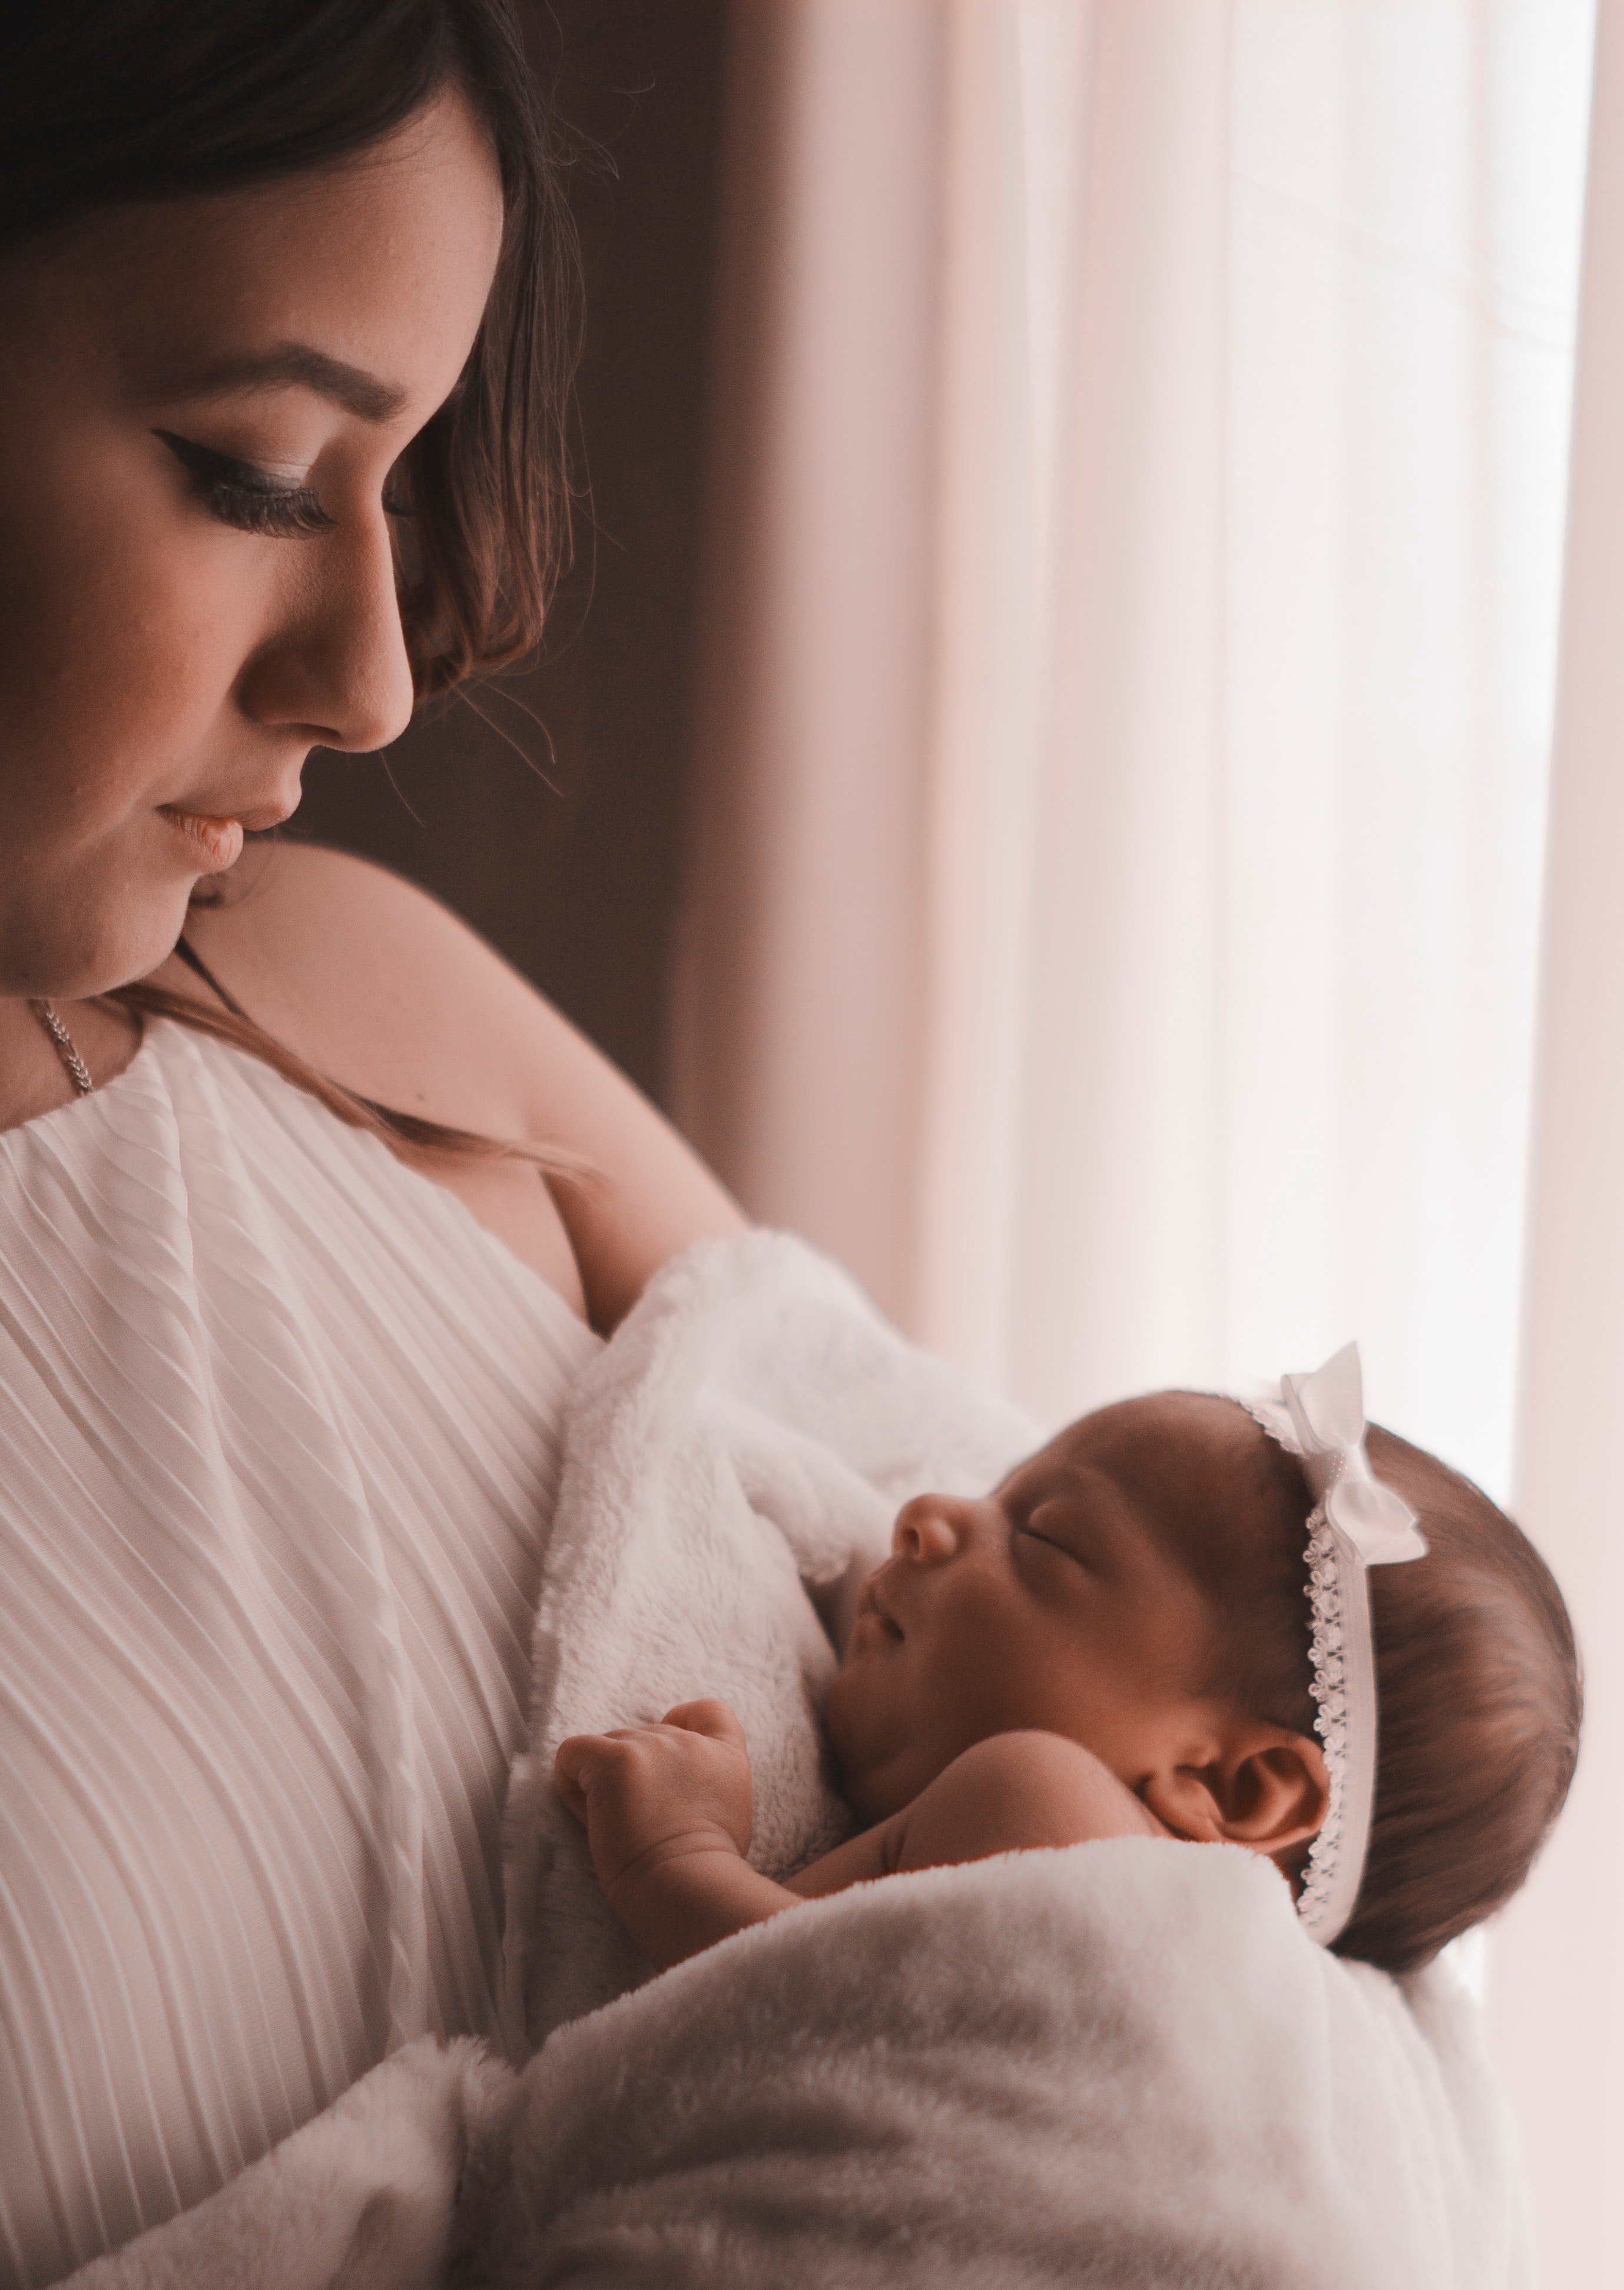 A recent mother holding her newborn and looking at the baby with affection. I Image: Pexels.